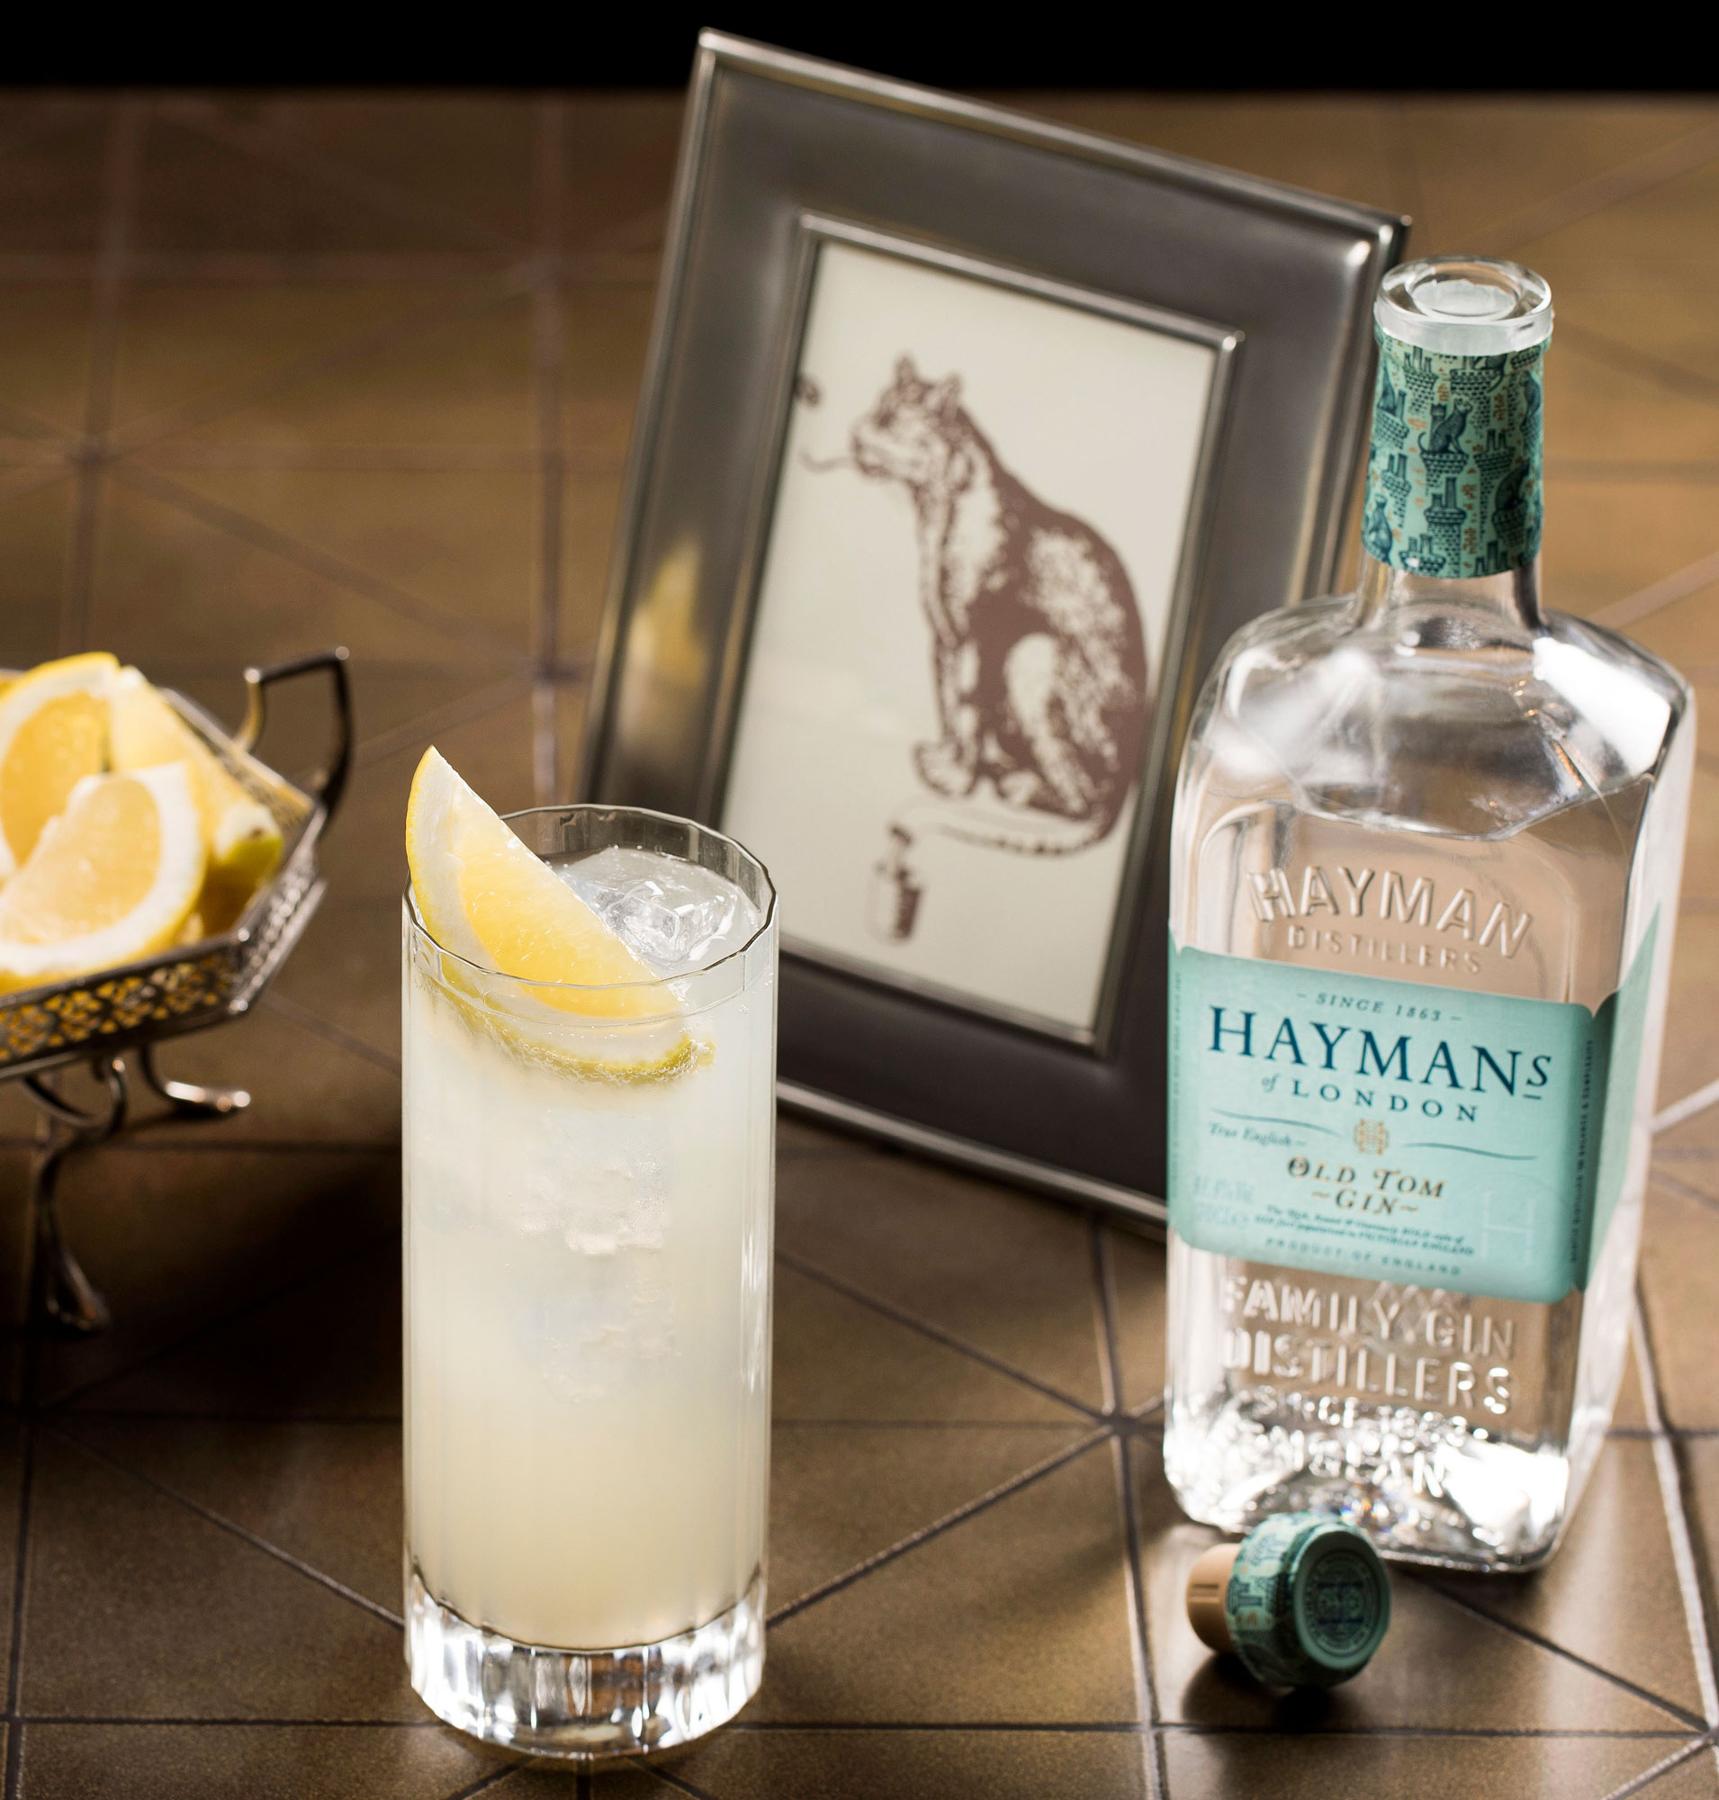 An example of the Tom Collins, the mixed drink (drink) featuring soda water, Hayman’s Old Tom Gin, lemon juice, simple syrup, and lemon wheel; photo by Hayman’s of London